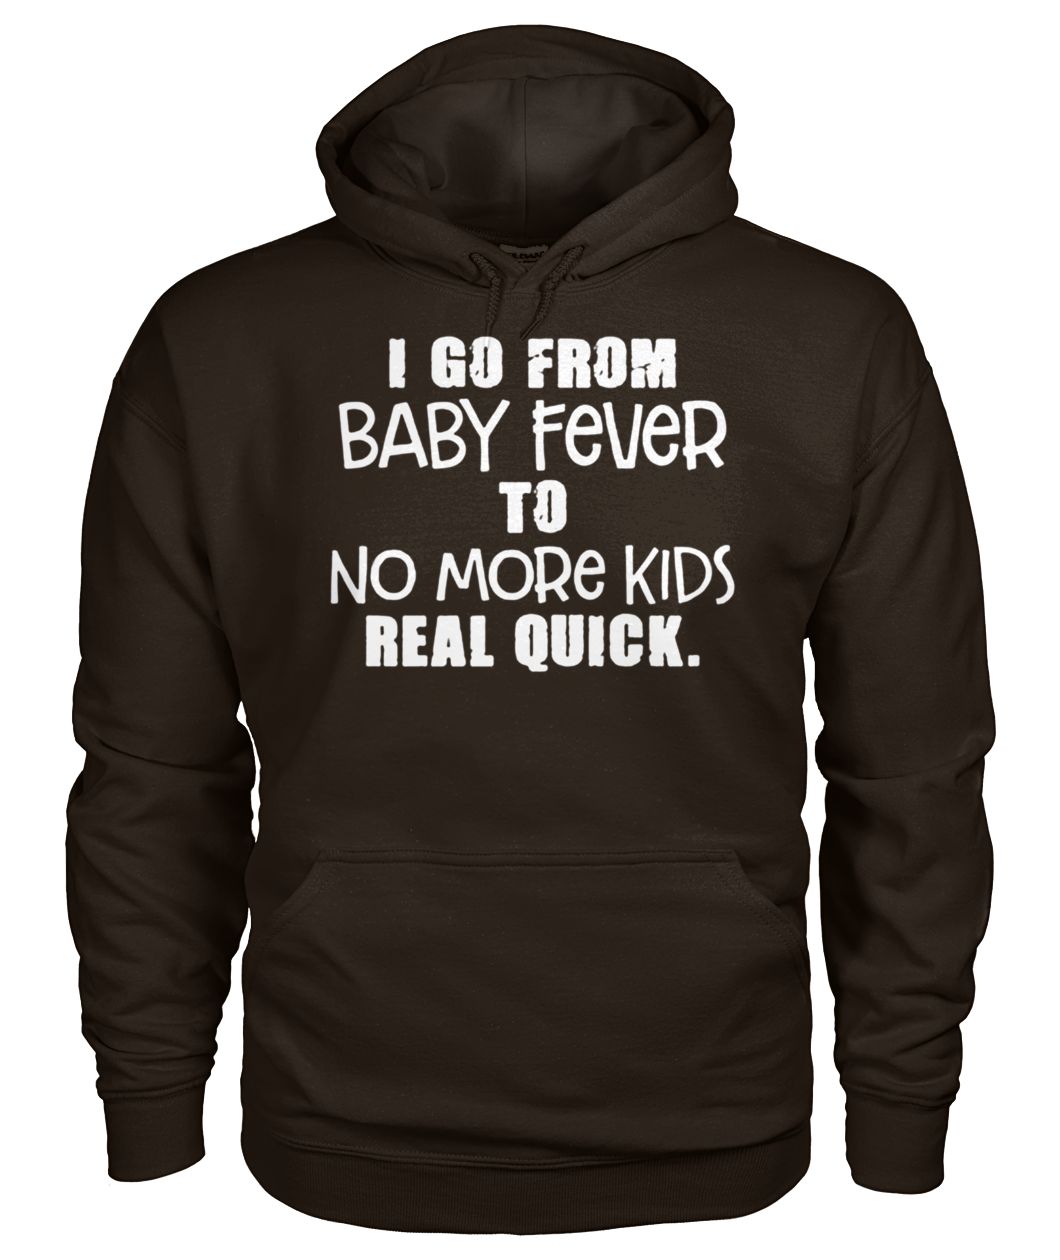 I go from baby fever to no more kids real quick gildan hoodie